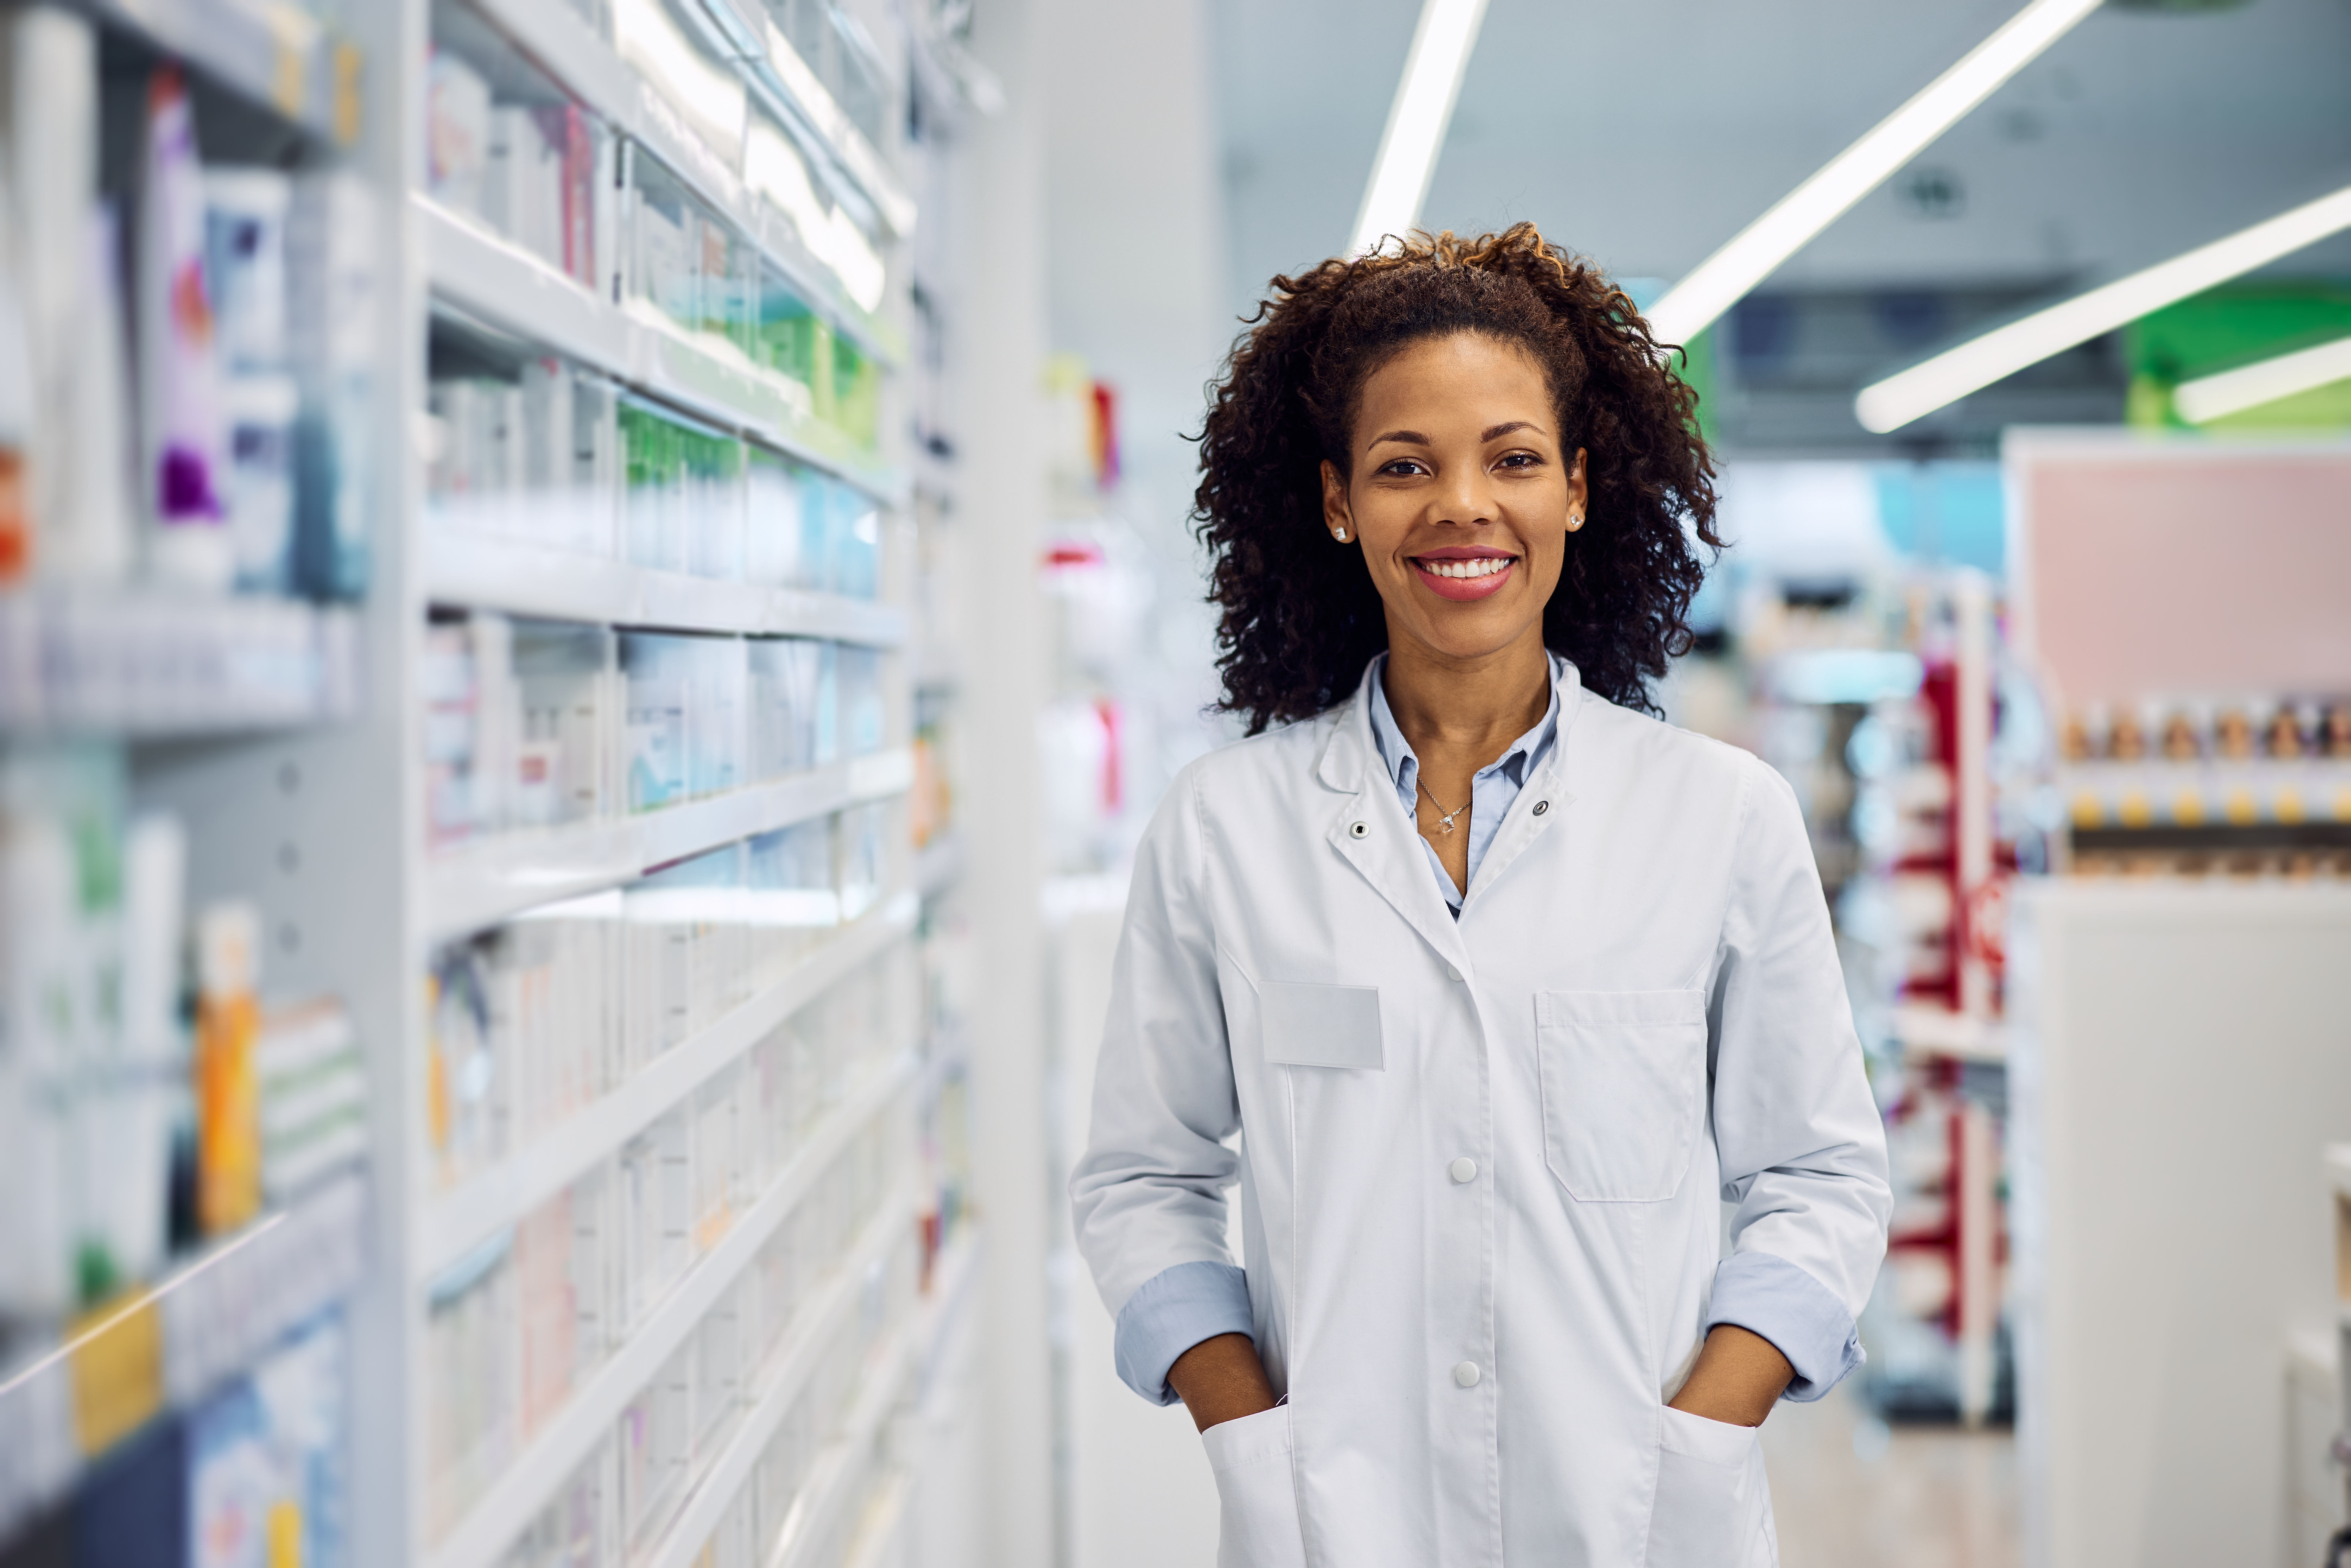 A female pharmacist with curly hair smiling at the pharmacy.